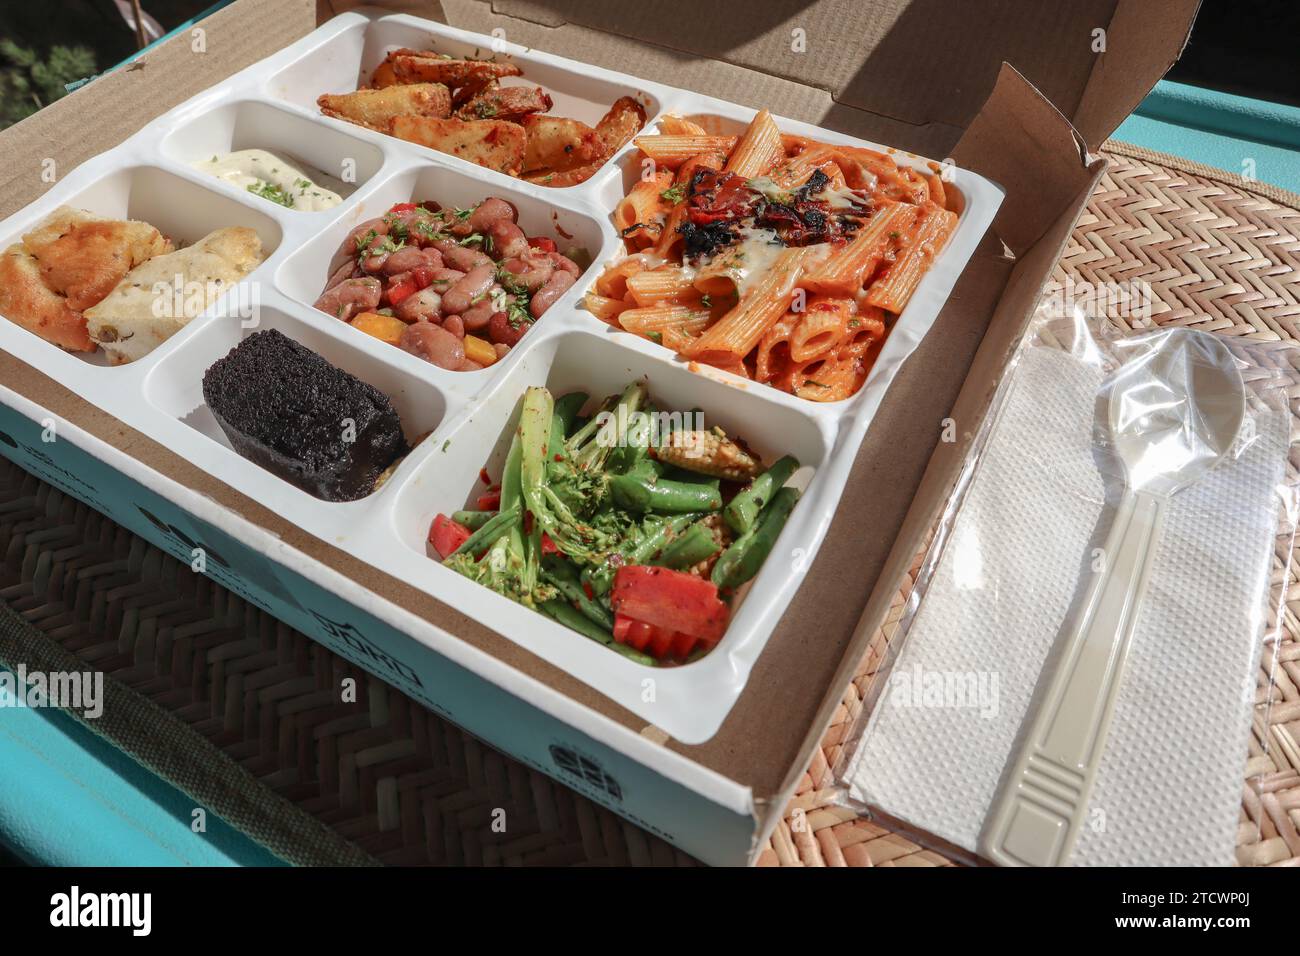 Continental or Americal lunch platter parcel.Pasta, crunchy salad, brownie, Potato wedges with dip Stock Photo